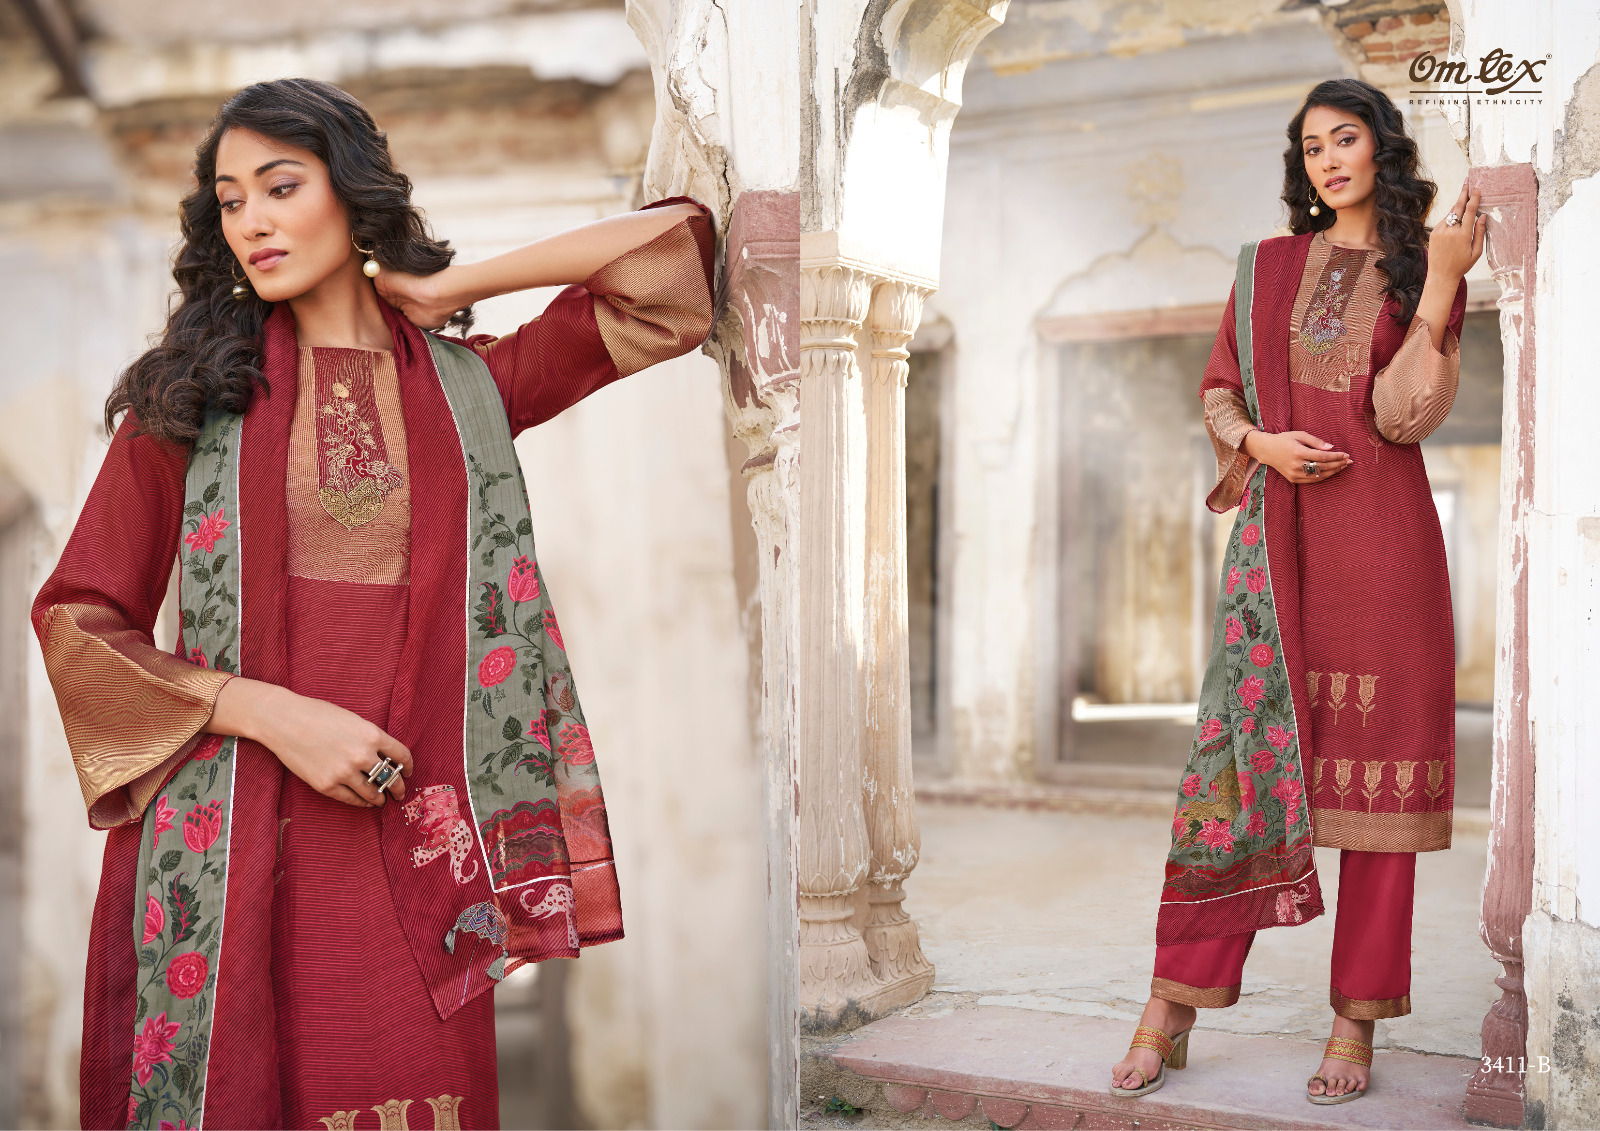 Omtex Aakriti Vol 2 collection 2